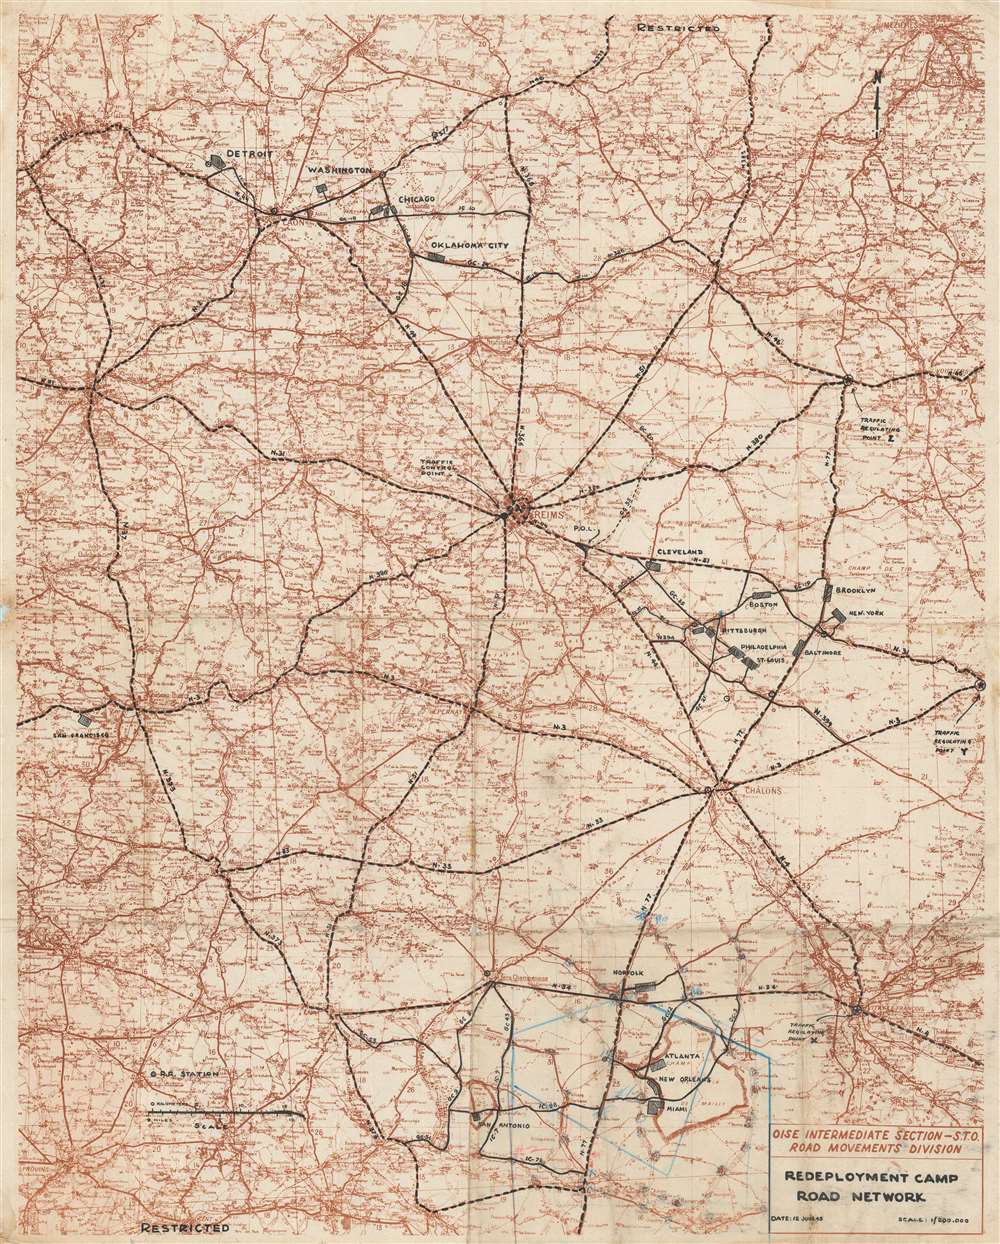 Redeployment Camp Road Network. - Main View